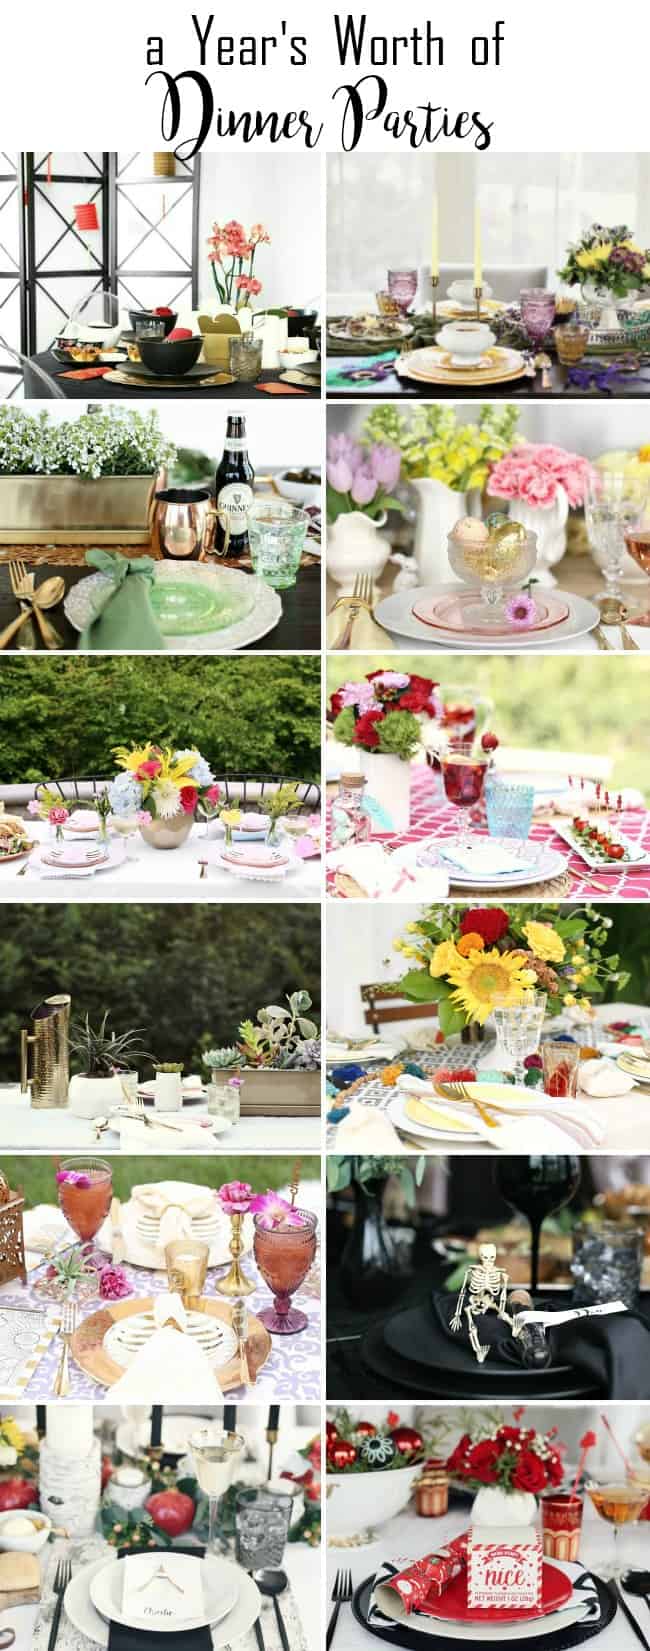 themed dinner party ideas for 12 months of the year